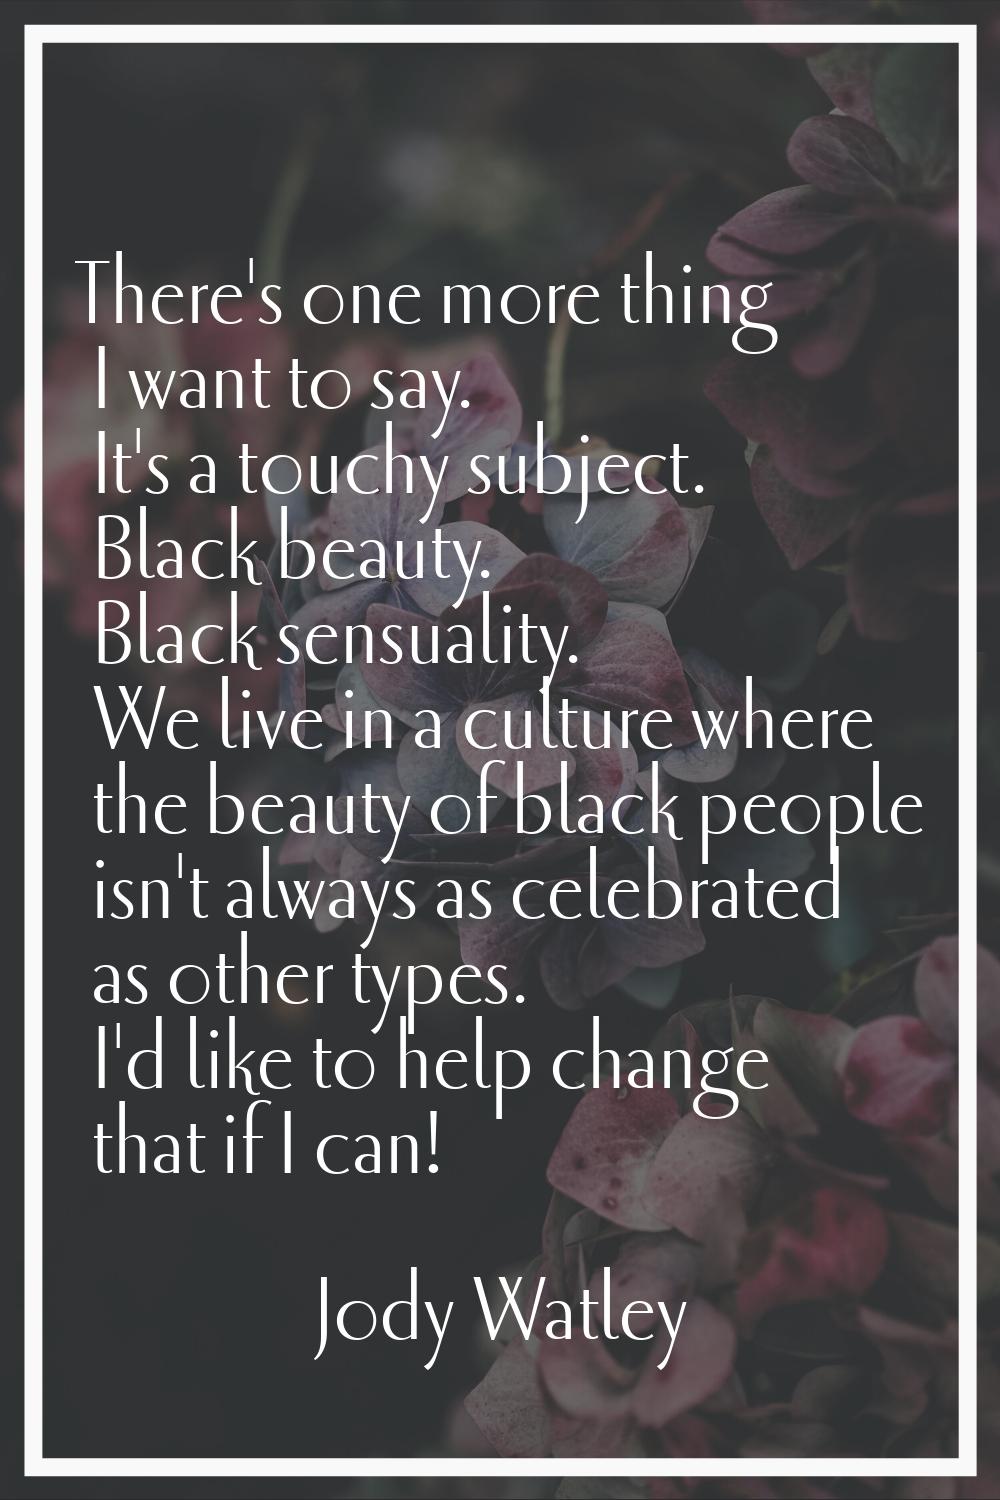 There's one more thing I want to say. It's a touchy subject. Black beauty. Black sensuality. We liv